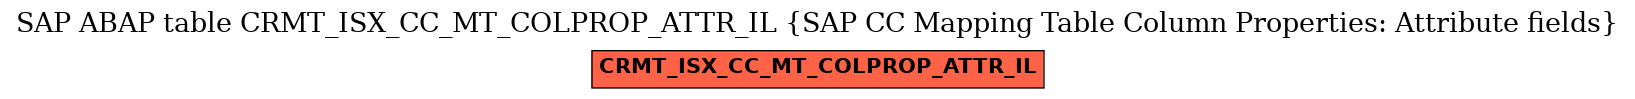 E-R Diagram for table CRMT_ISX_CC_MT_COLPROP_ATTR_IL (SAP CC Mapping Table Column Properties: Attribute fields)